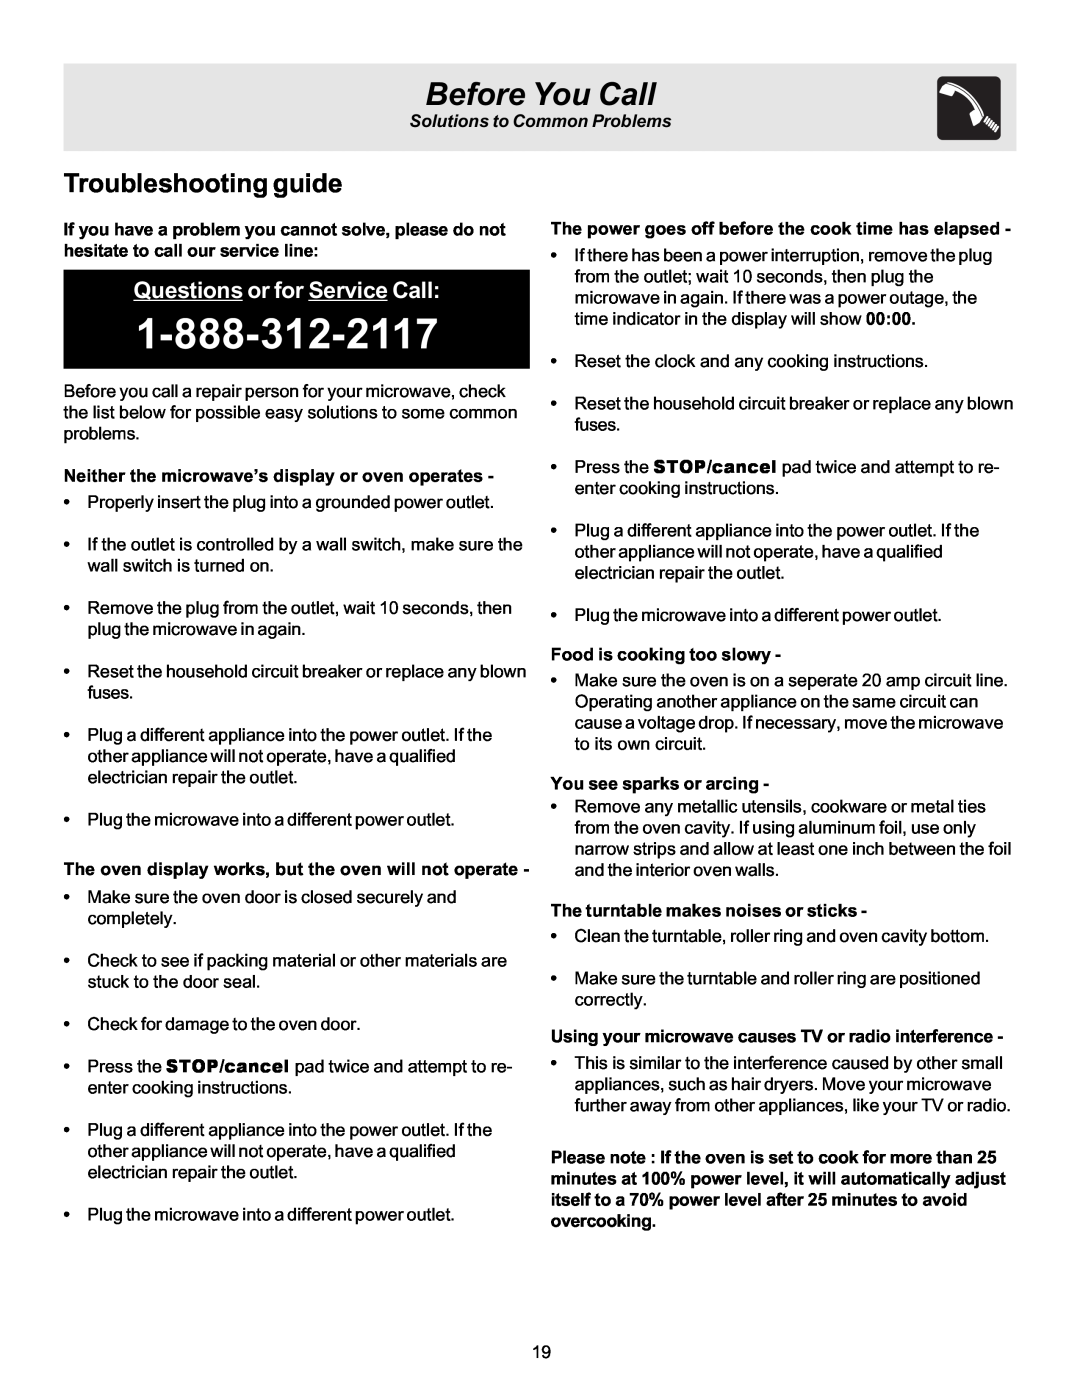 Frigidaire 316495002 Before You Call, Troubleshooting guide, Questions or for Service Call, Solutions to Common Problems 